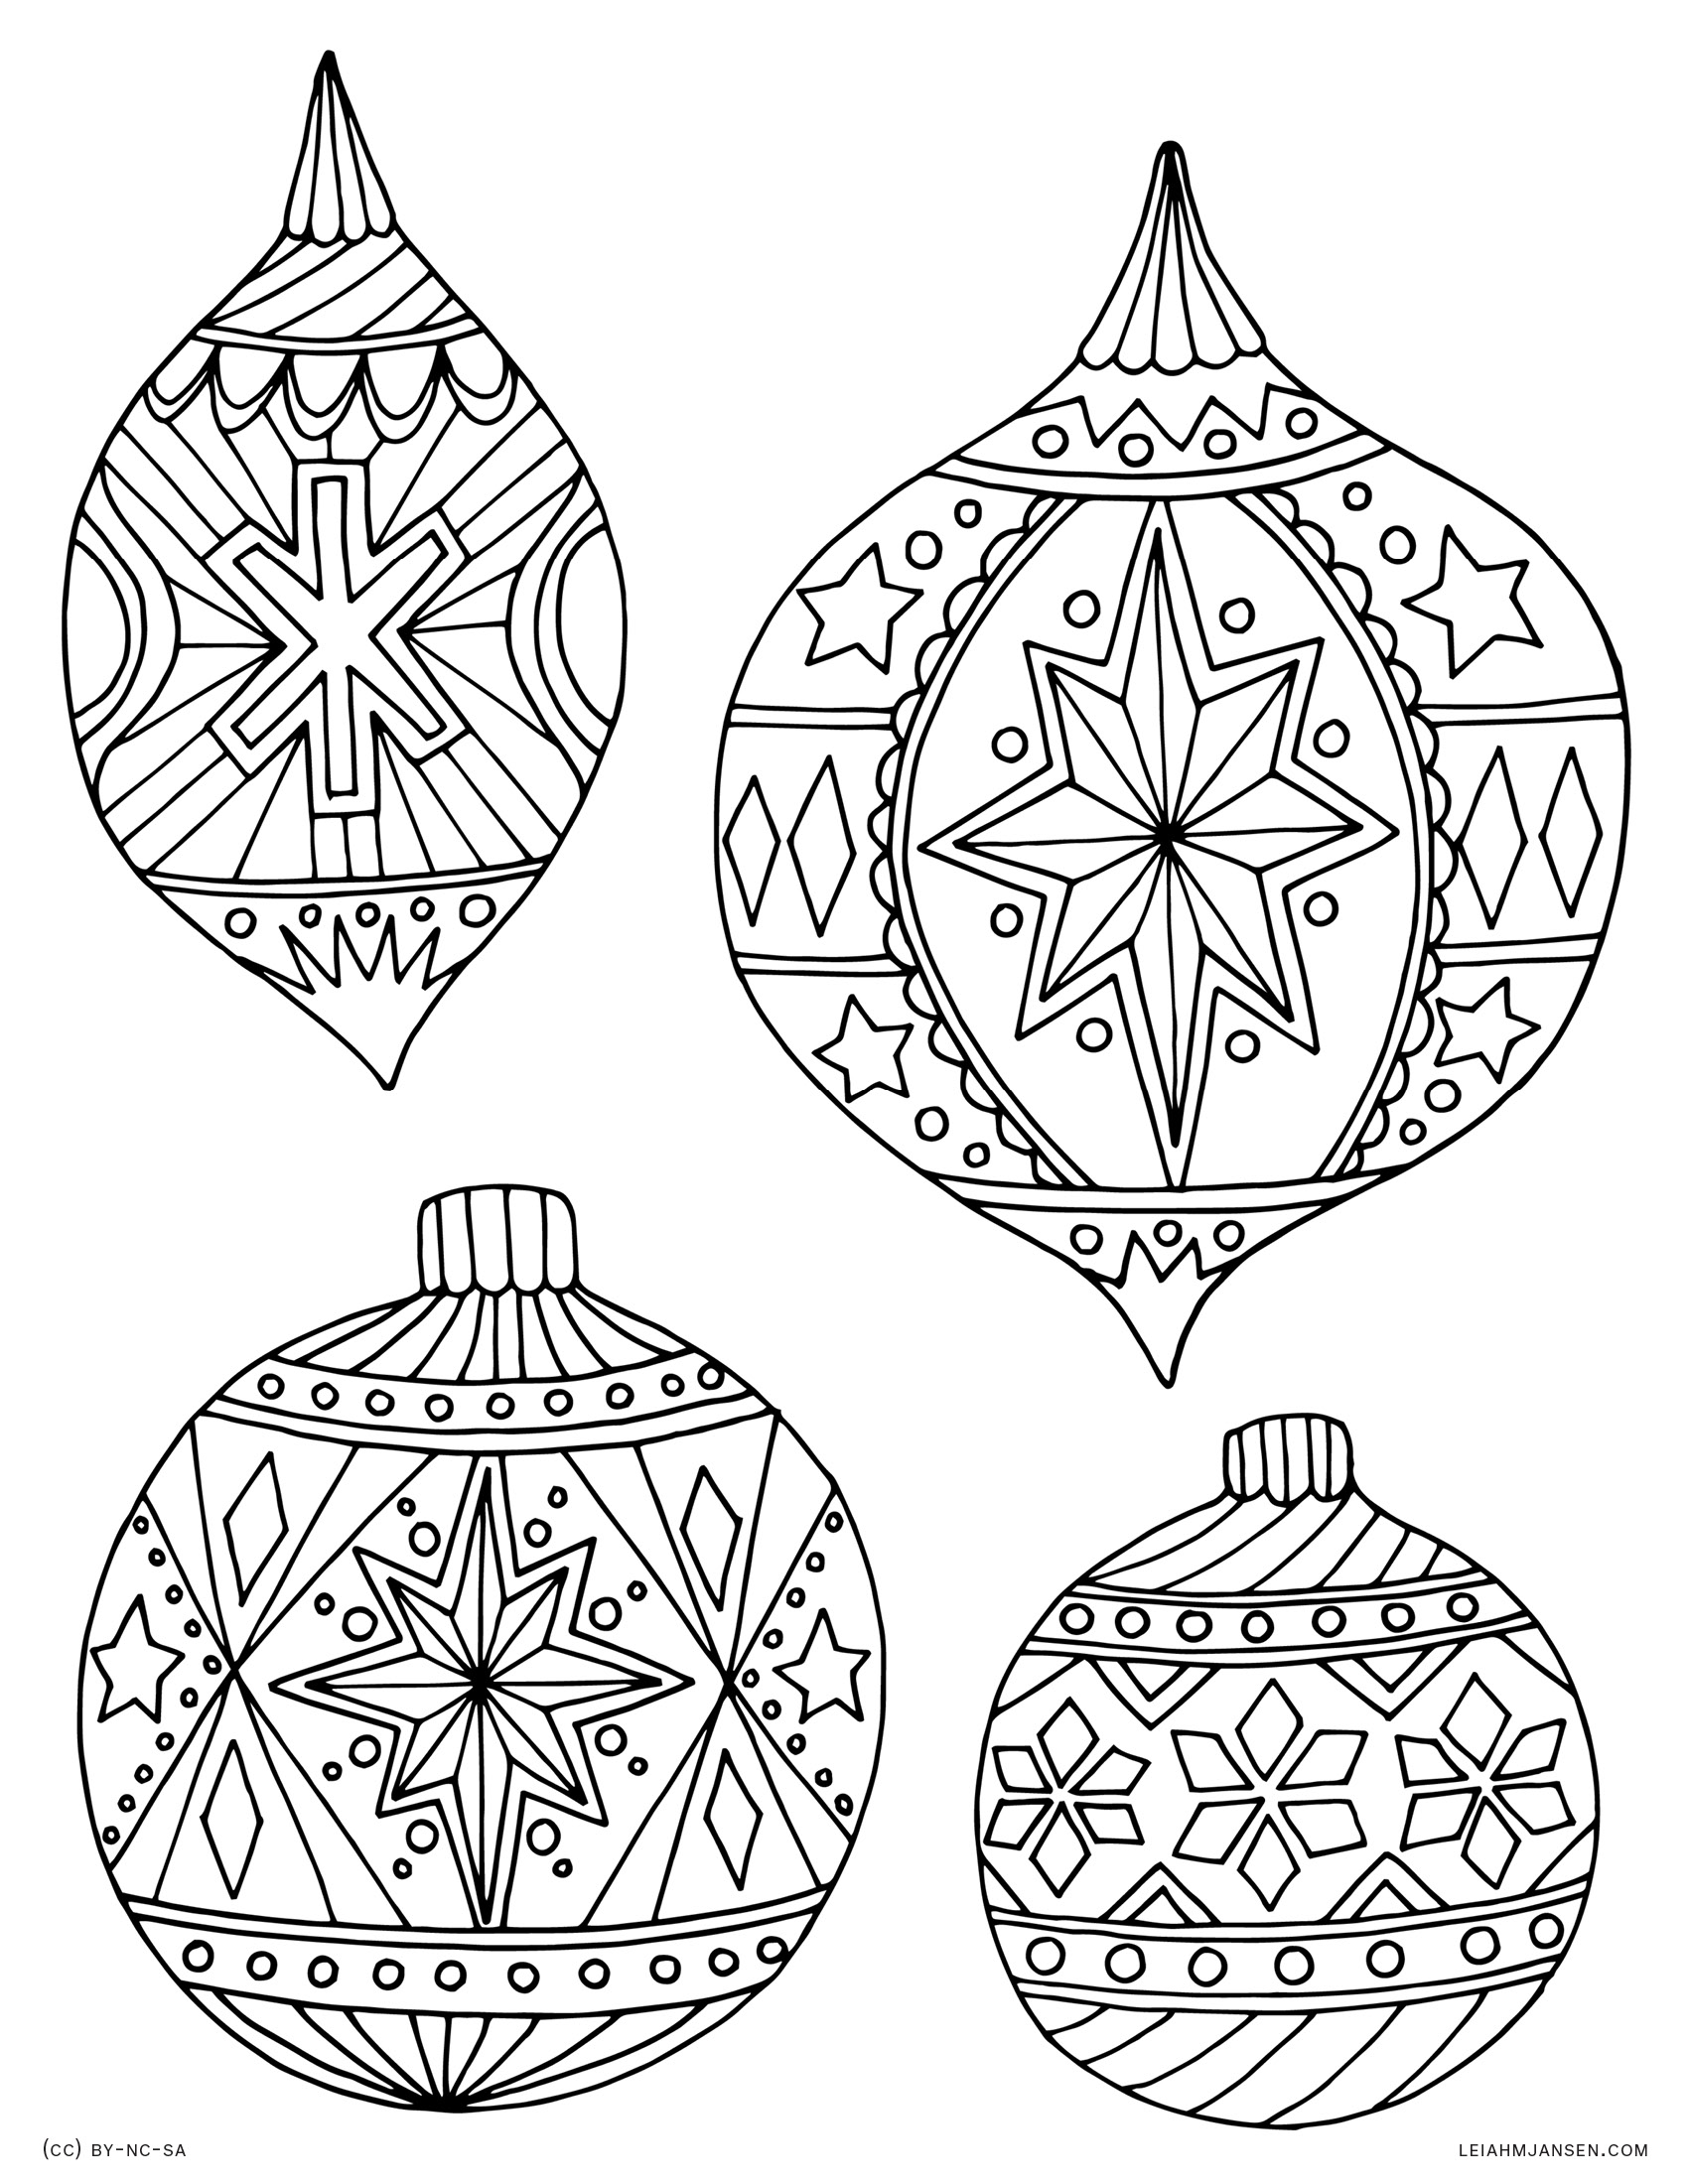 LMJ coloring page holiday ornaments